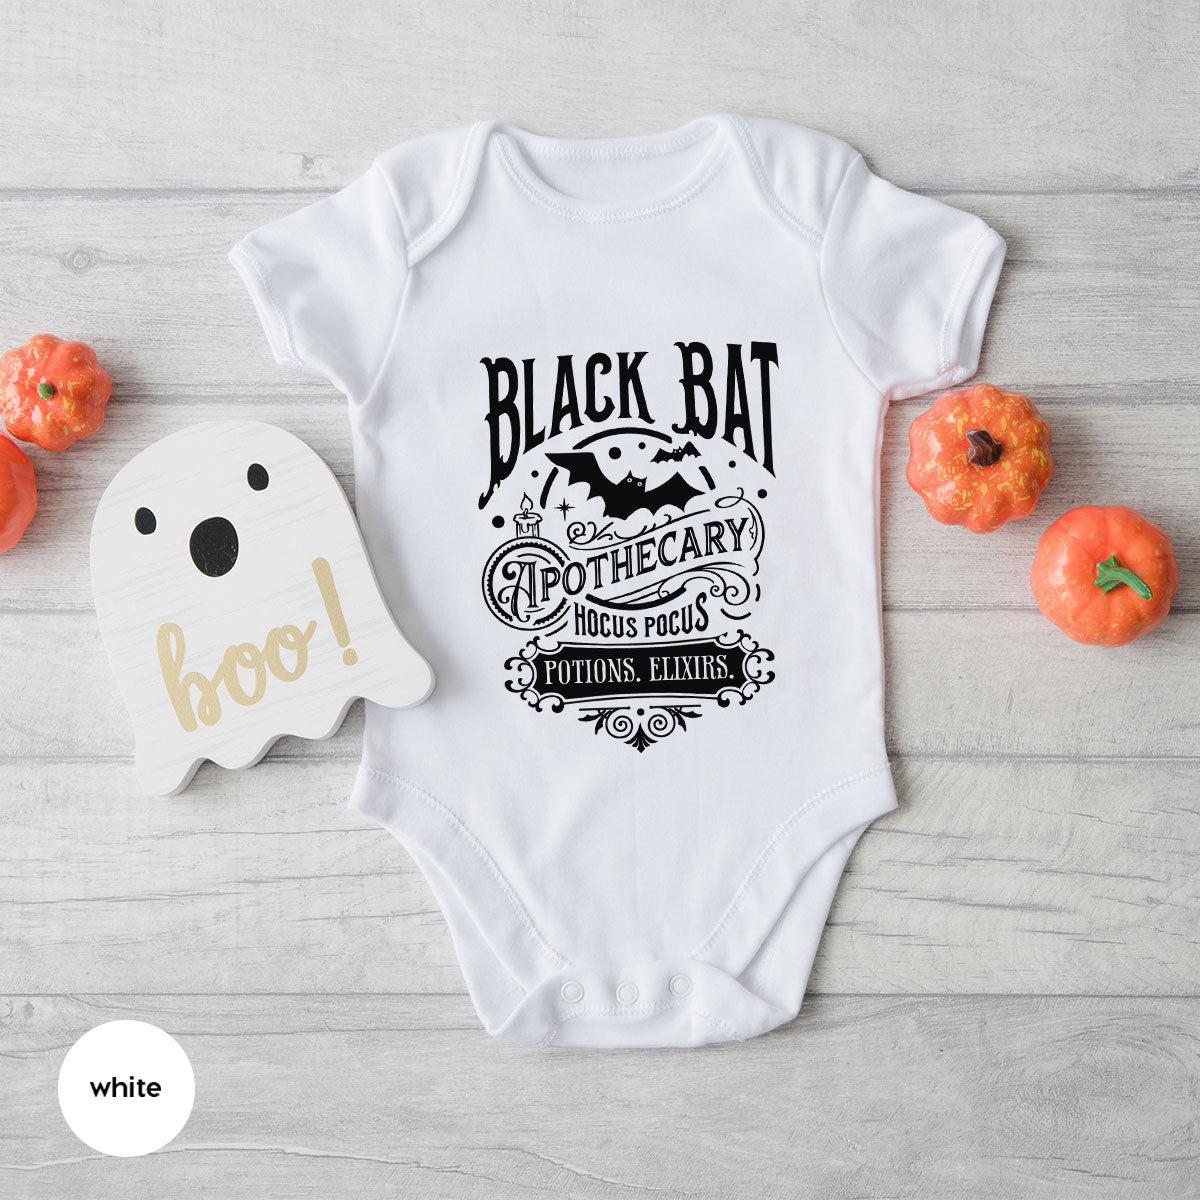 Funny Halloween Gifts, Bat Graphic Tees, Hocus Pocus Shirt, Spooky Season Tshirt, Apothecary Clothing, Women Vneck Shirts, Gift for Kids